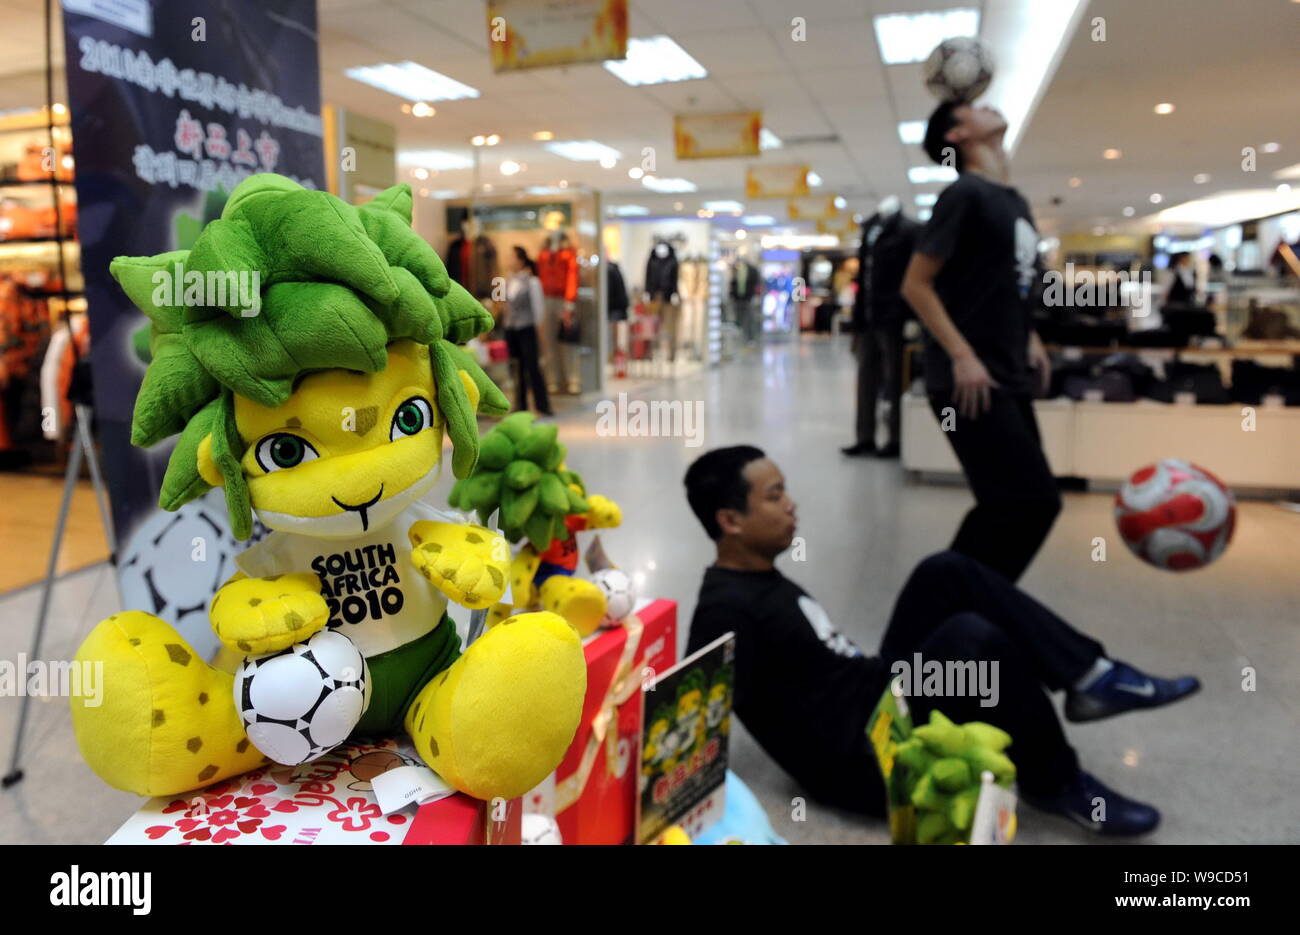 Chinese football players show football skills to promote toys of Zakumi, the official mascot of 2010 FIFA World Cup South Africa, at a department stor Stock Photo